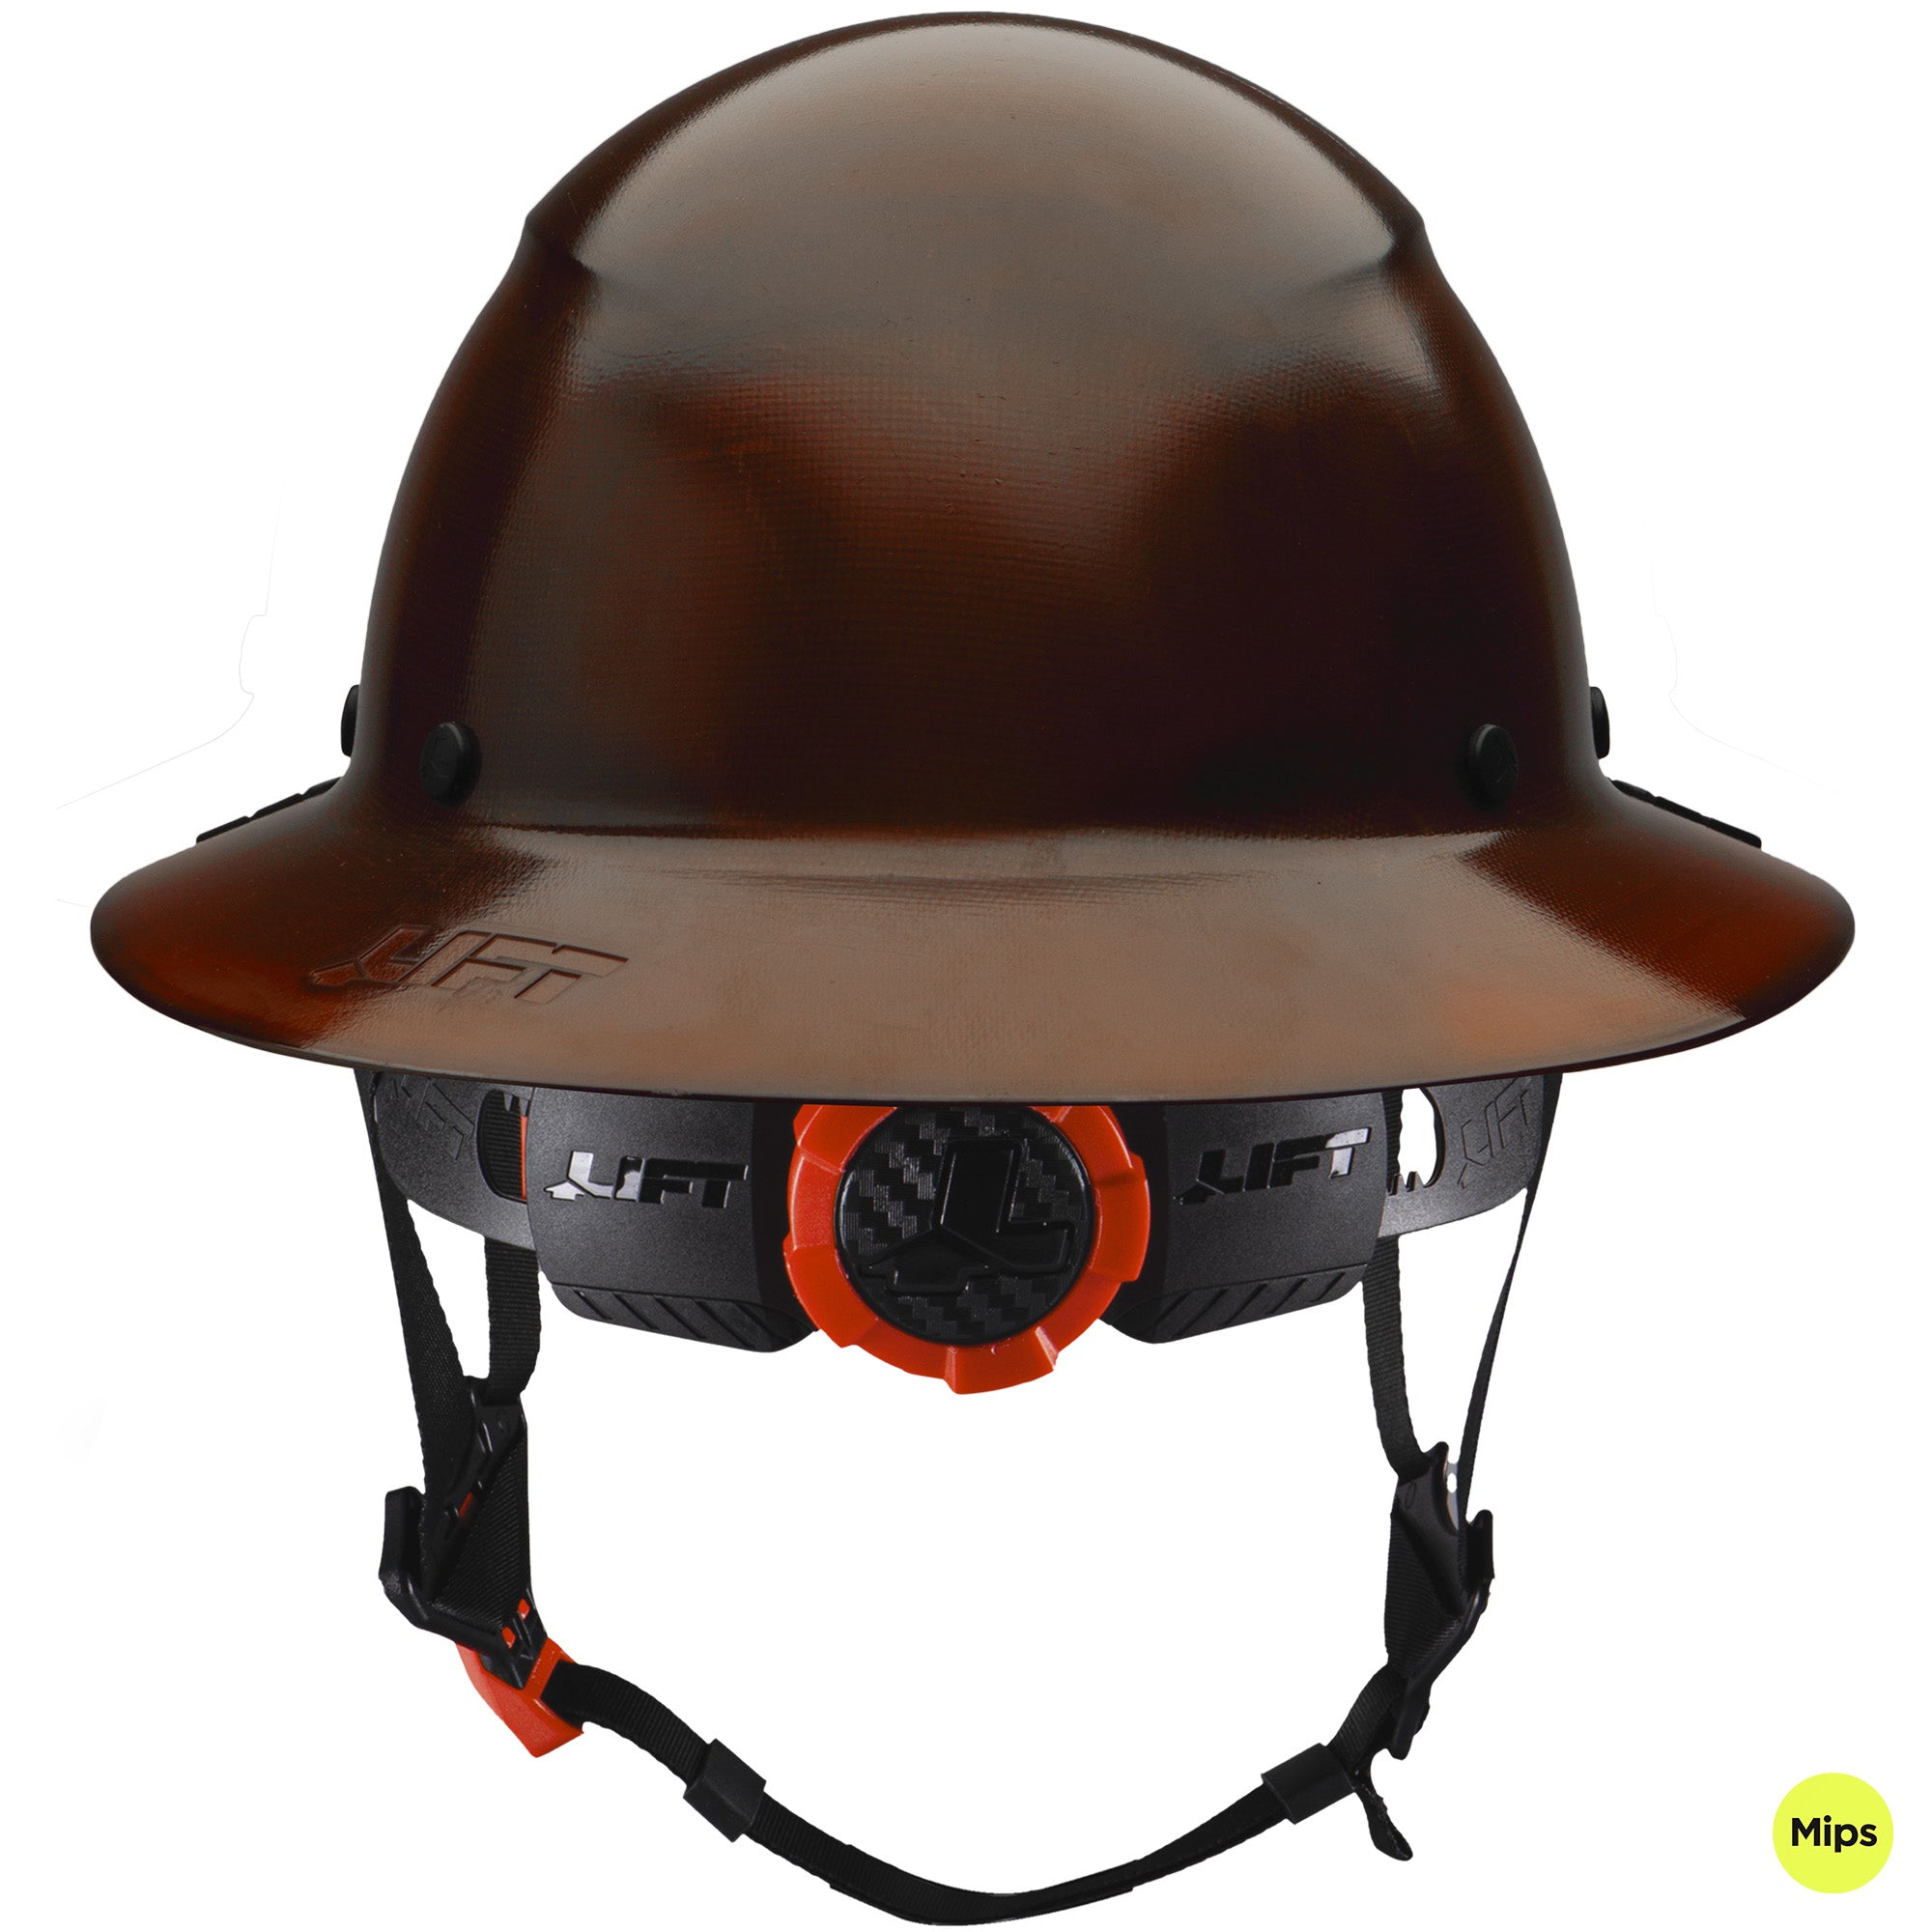 DAX Full Brim Hard Hat with Mips - Natural